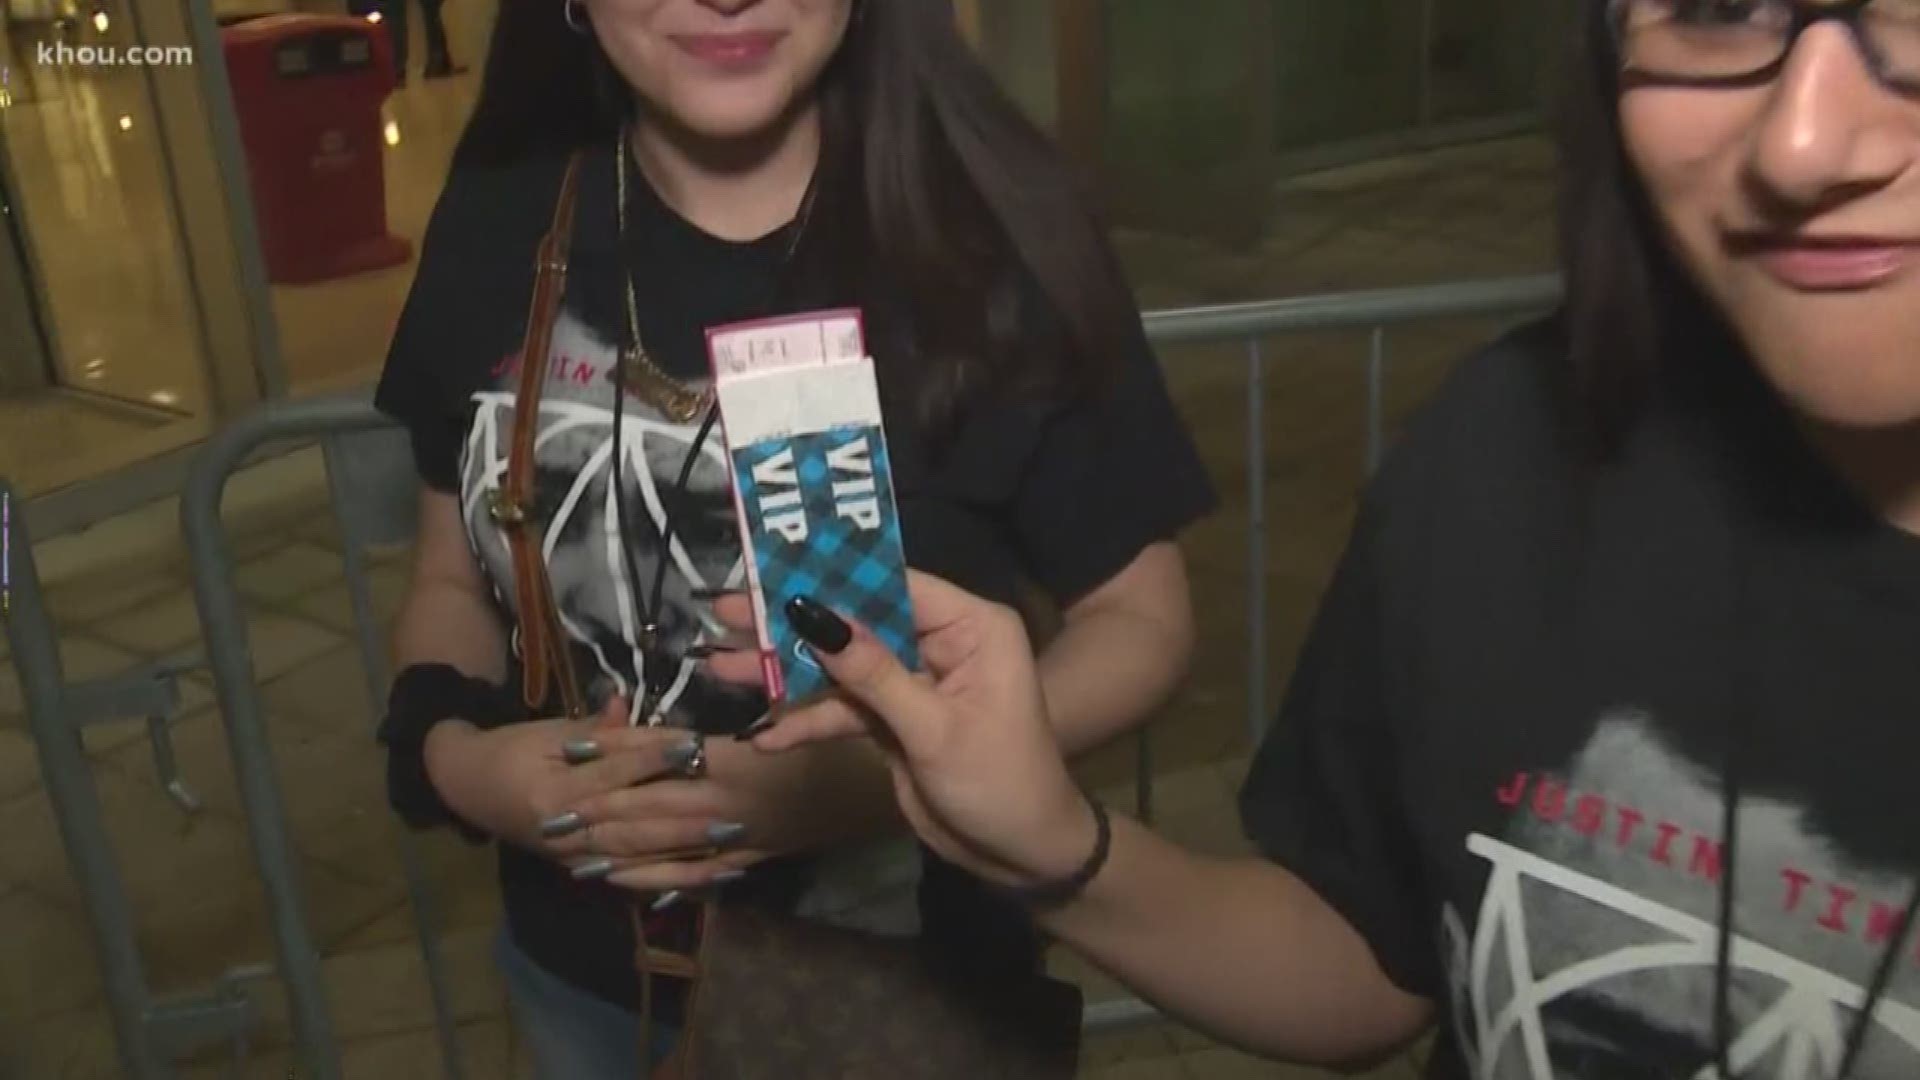 Sarah Salazar, a Santa Fe shooting survivor, got VIP tickets to the Justin Timberlake concert from the singer himself. Justim promised Sarah the tickets eight months ago after he visited her at the hospital right after the mass shooting.